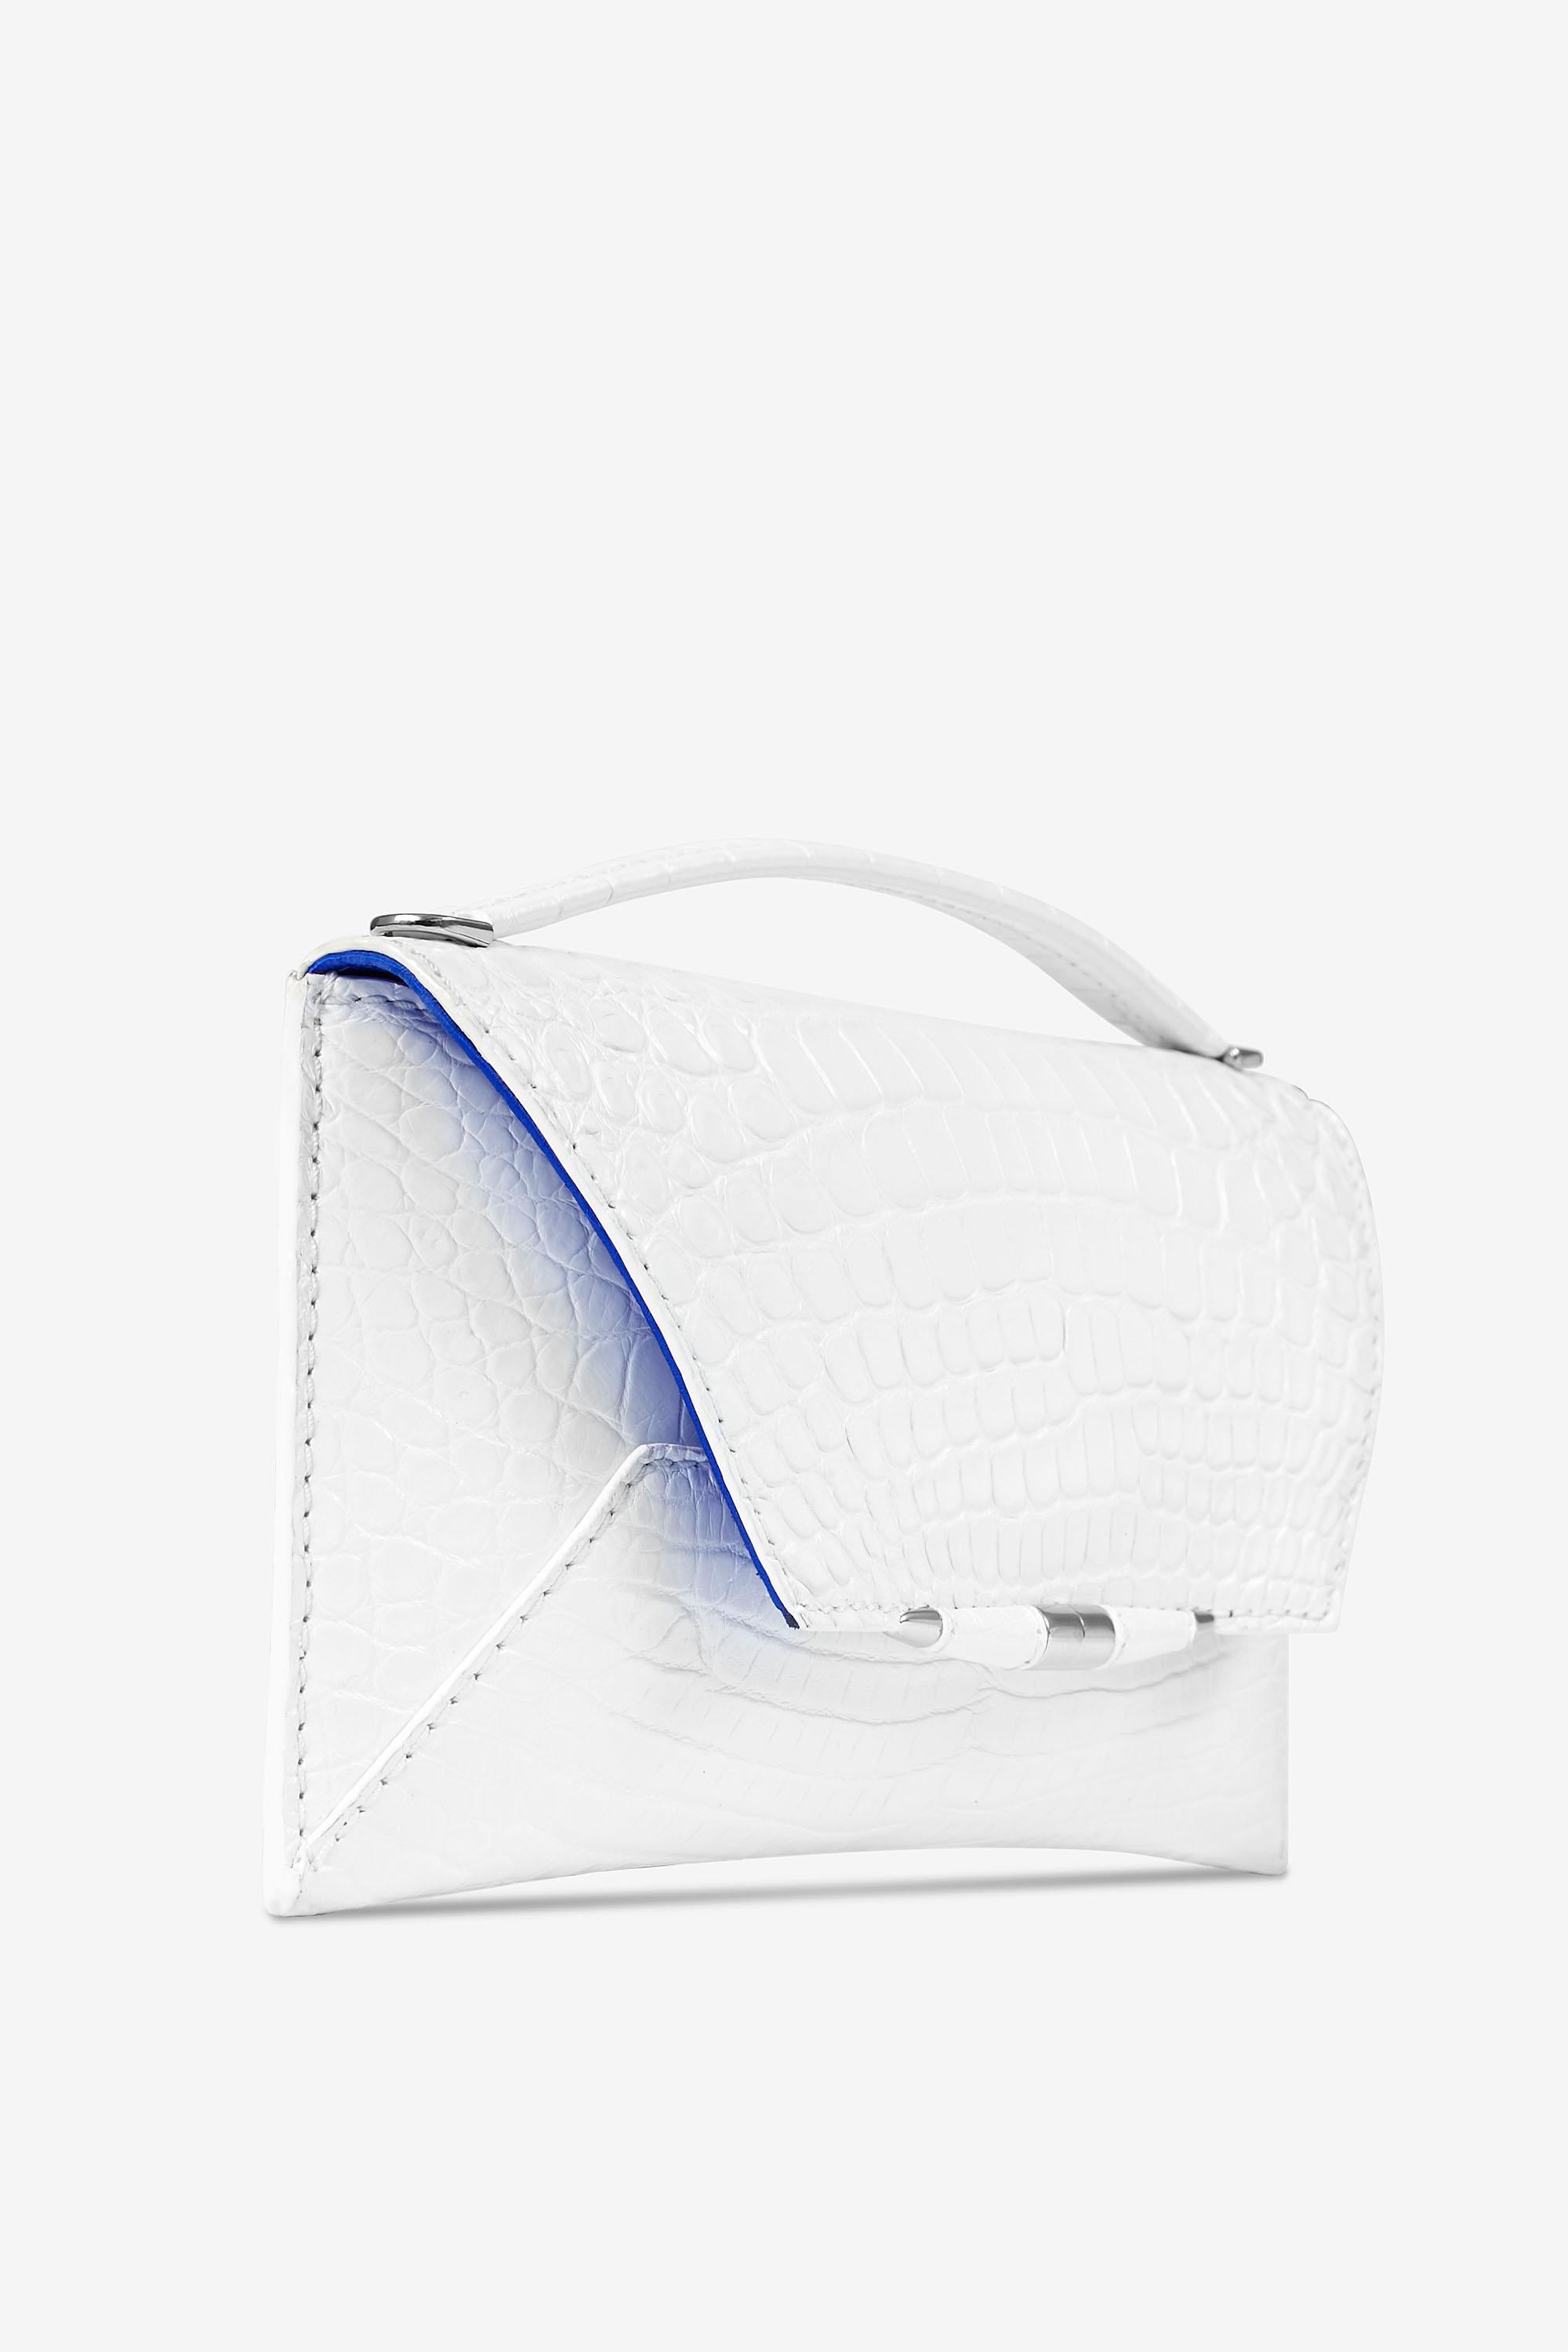 The Aimee Clutch Large White Alligator Silver Hardware is designed with a magnetic front flap snap closure, hidden exterior pocket and a detachable cross-body White Alligator strap. It features our custom infinity bar closure and signature Thayer